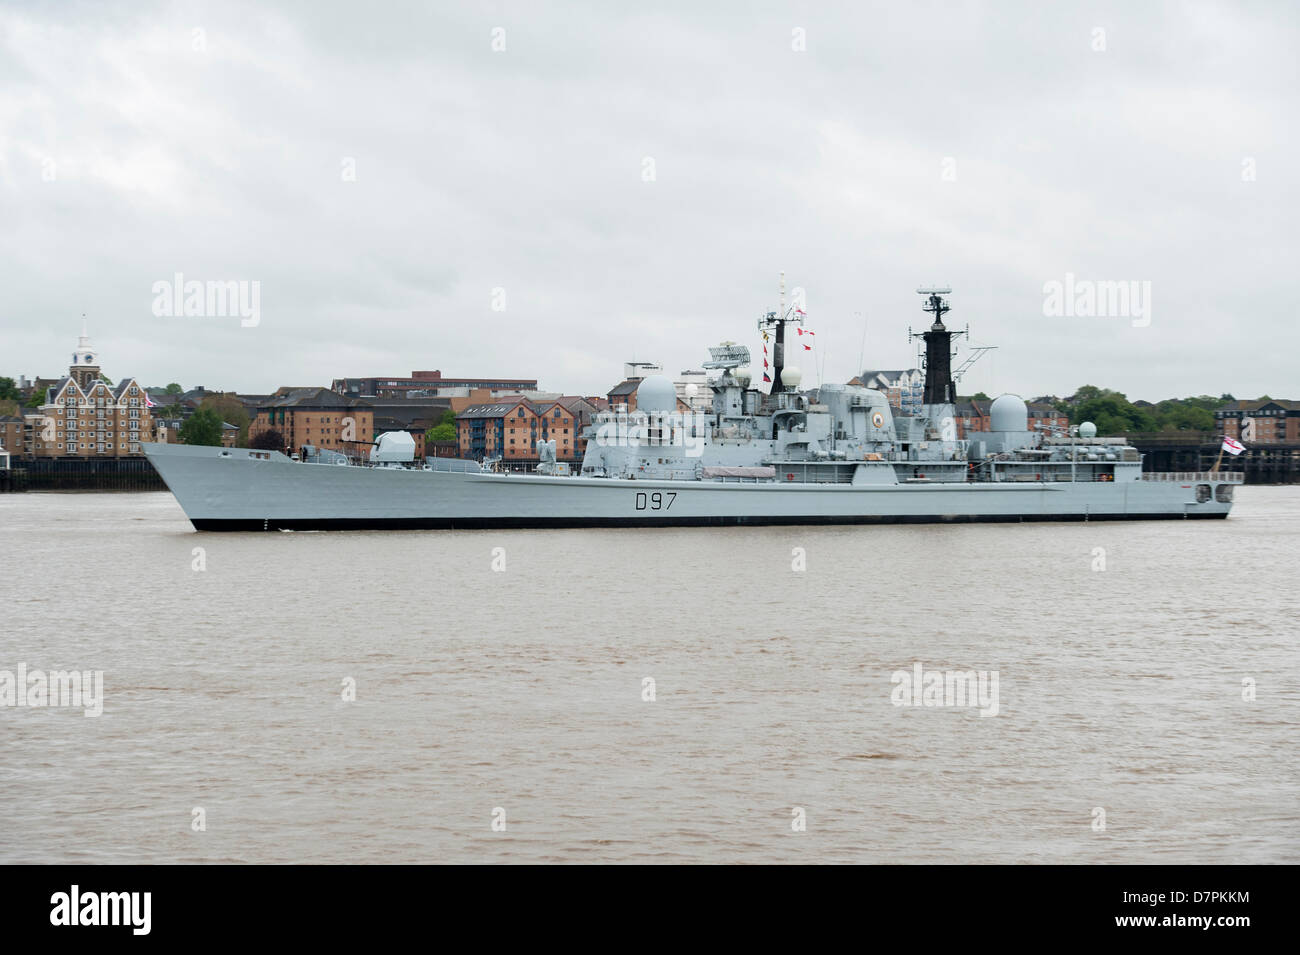 The British Naval ship HMS Edinburgh a type 42 destroyer in the River Thames, en-route to Leth, Scotland to be decommissioned. Stock Photo